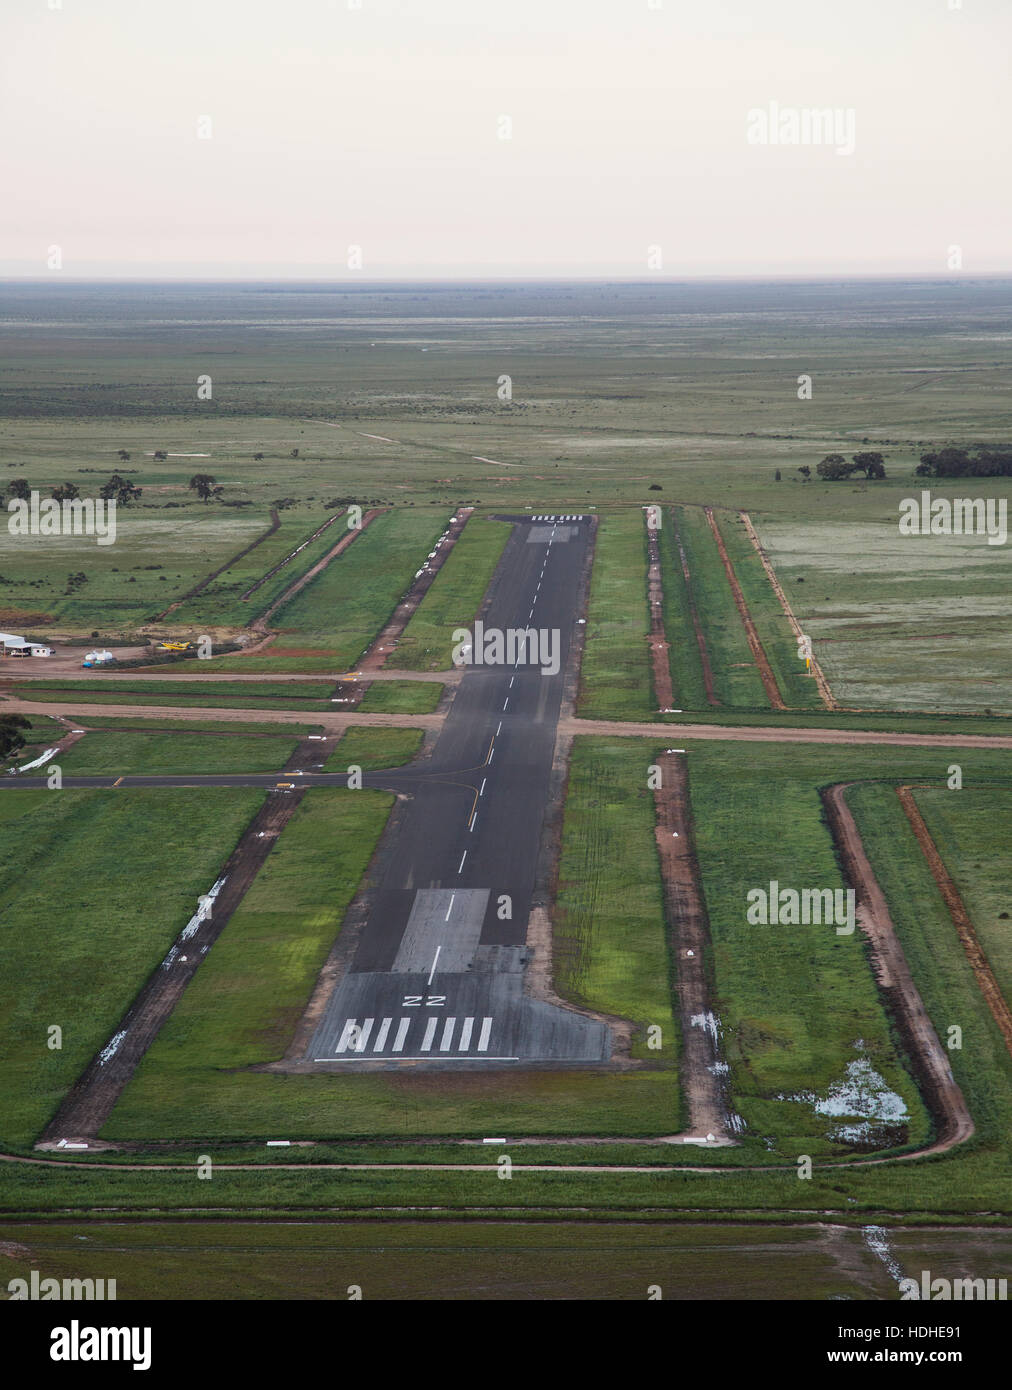 Aerial view of airport runway against clear sky, Hay, Victoria, Australia Stock Photo